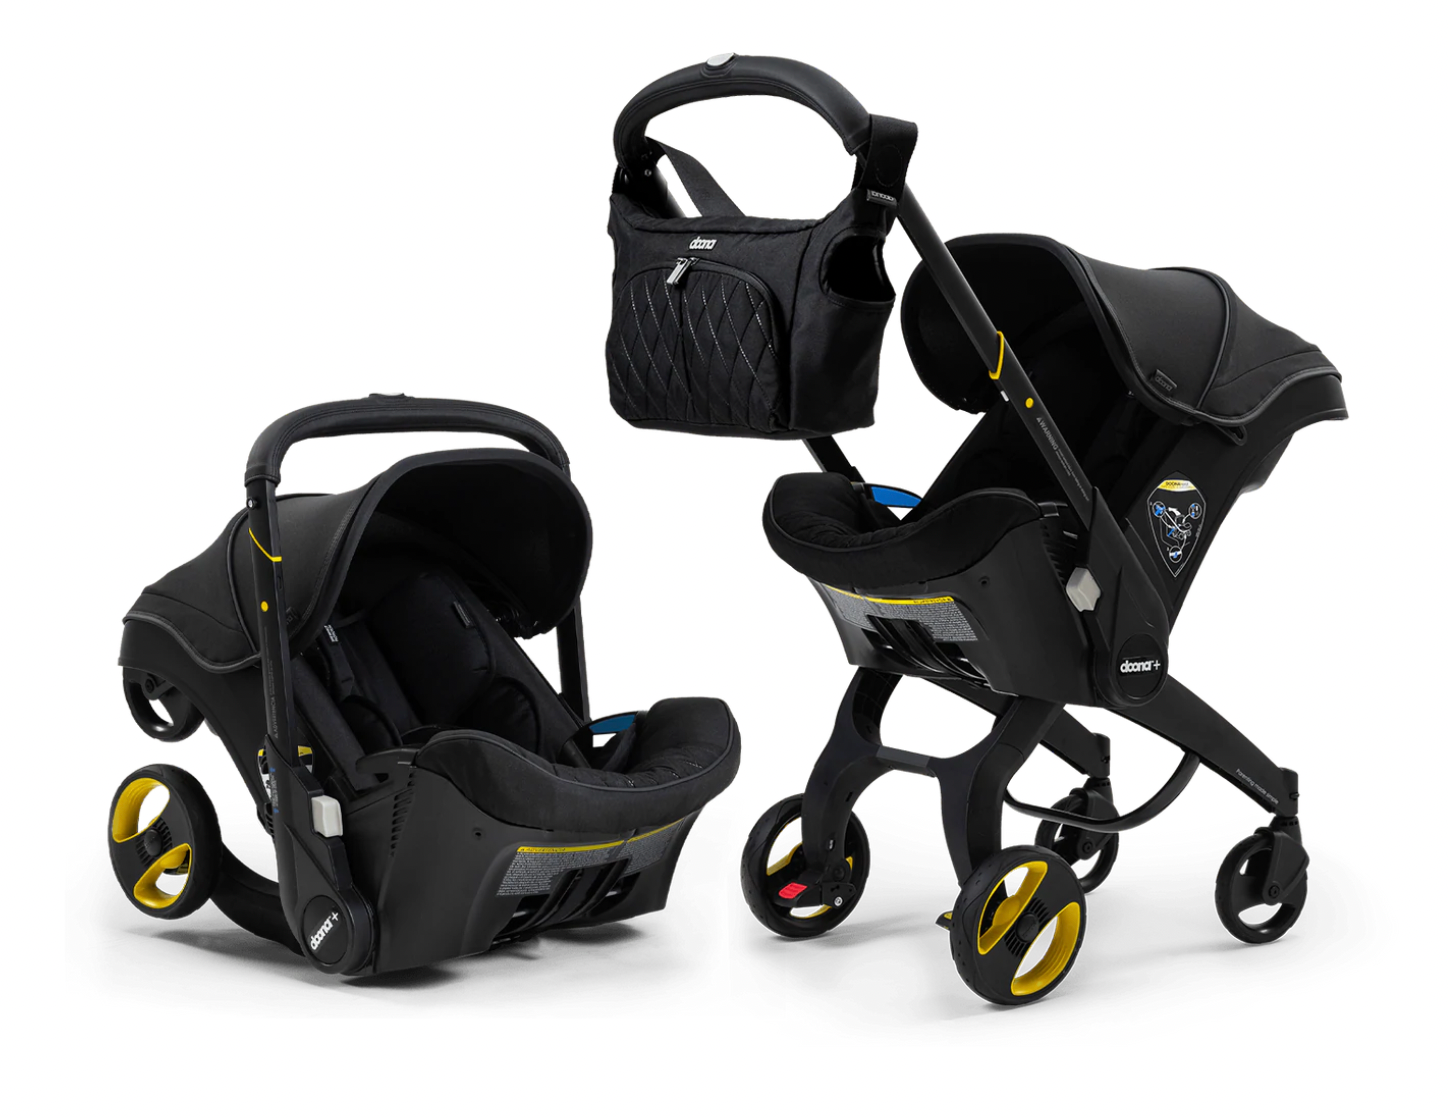 Doona™ Infant Car Seat - Limited Edition - Midnight